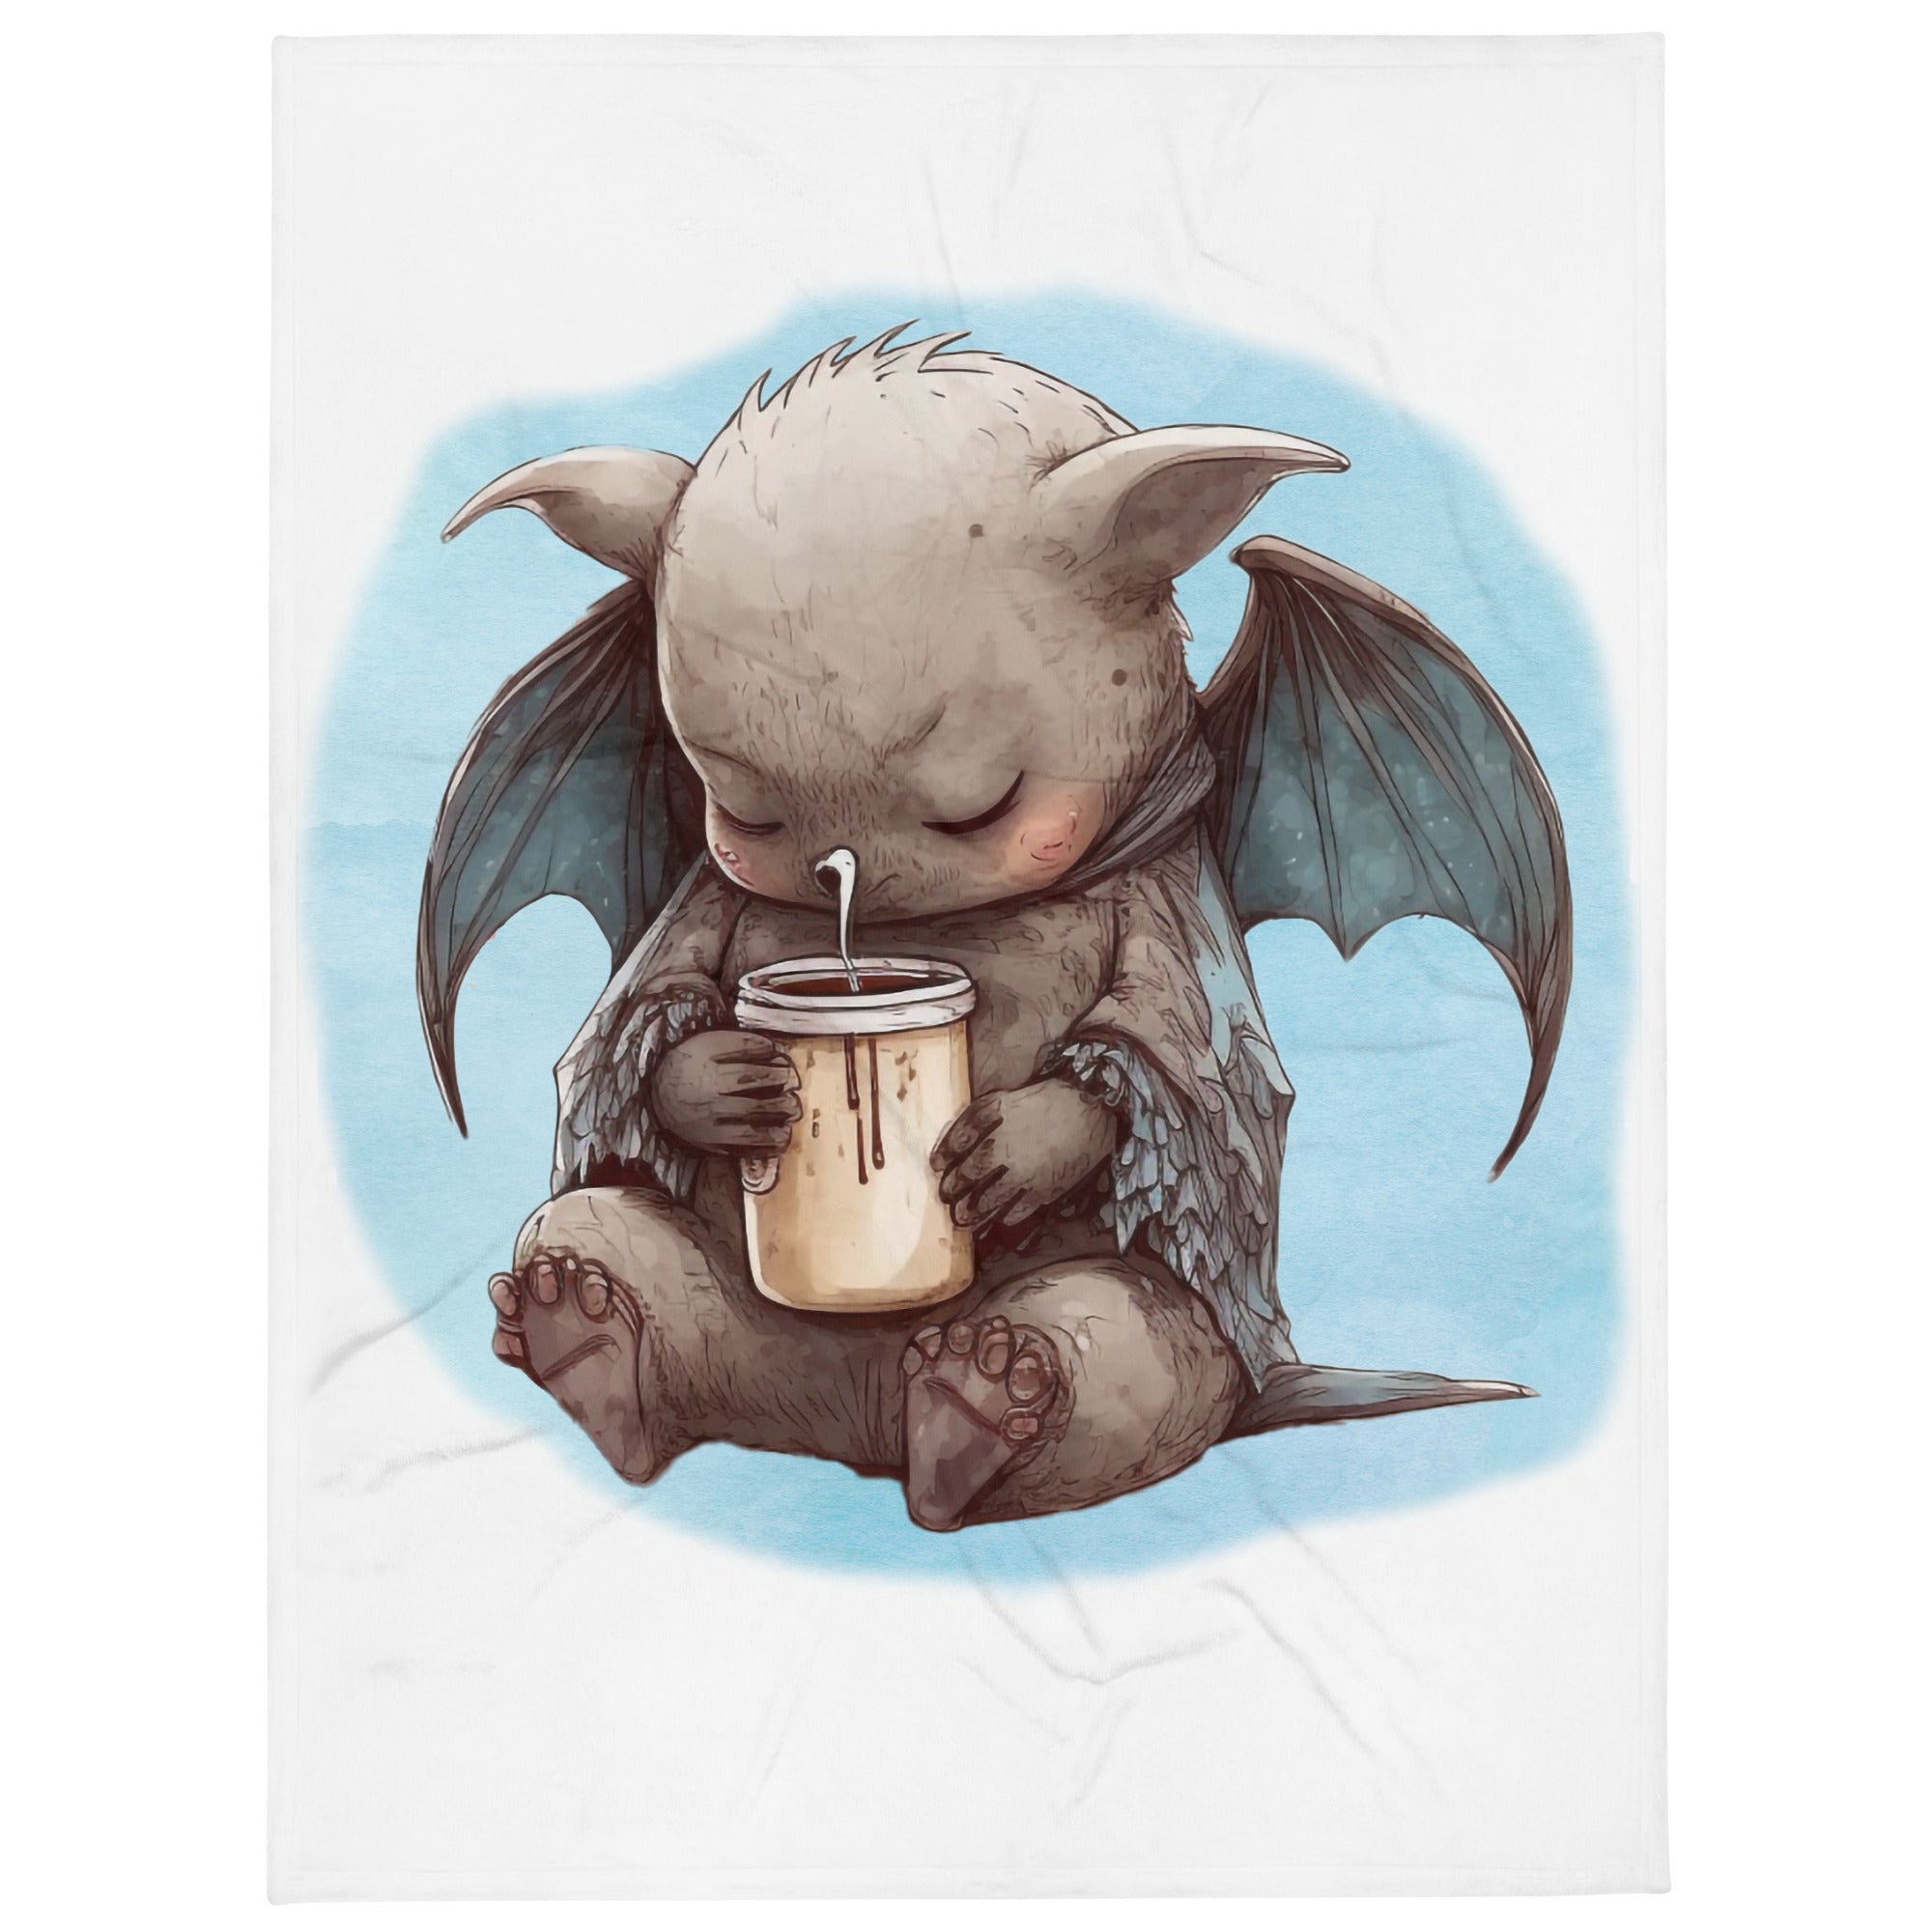 Sleepy Bat 100% Polyester Soft Silk Touch Fabric Throw Blanket - Cozy, Durable and Adorable